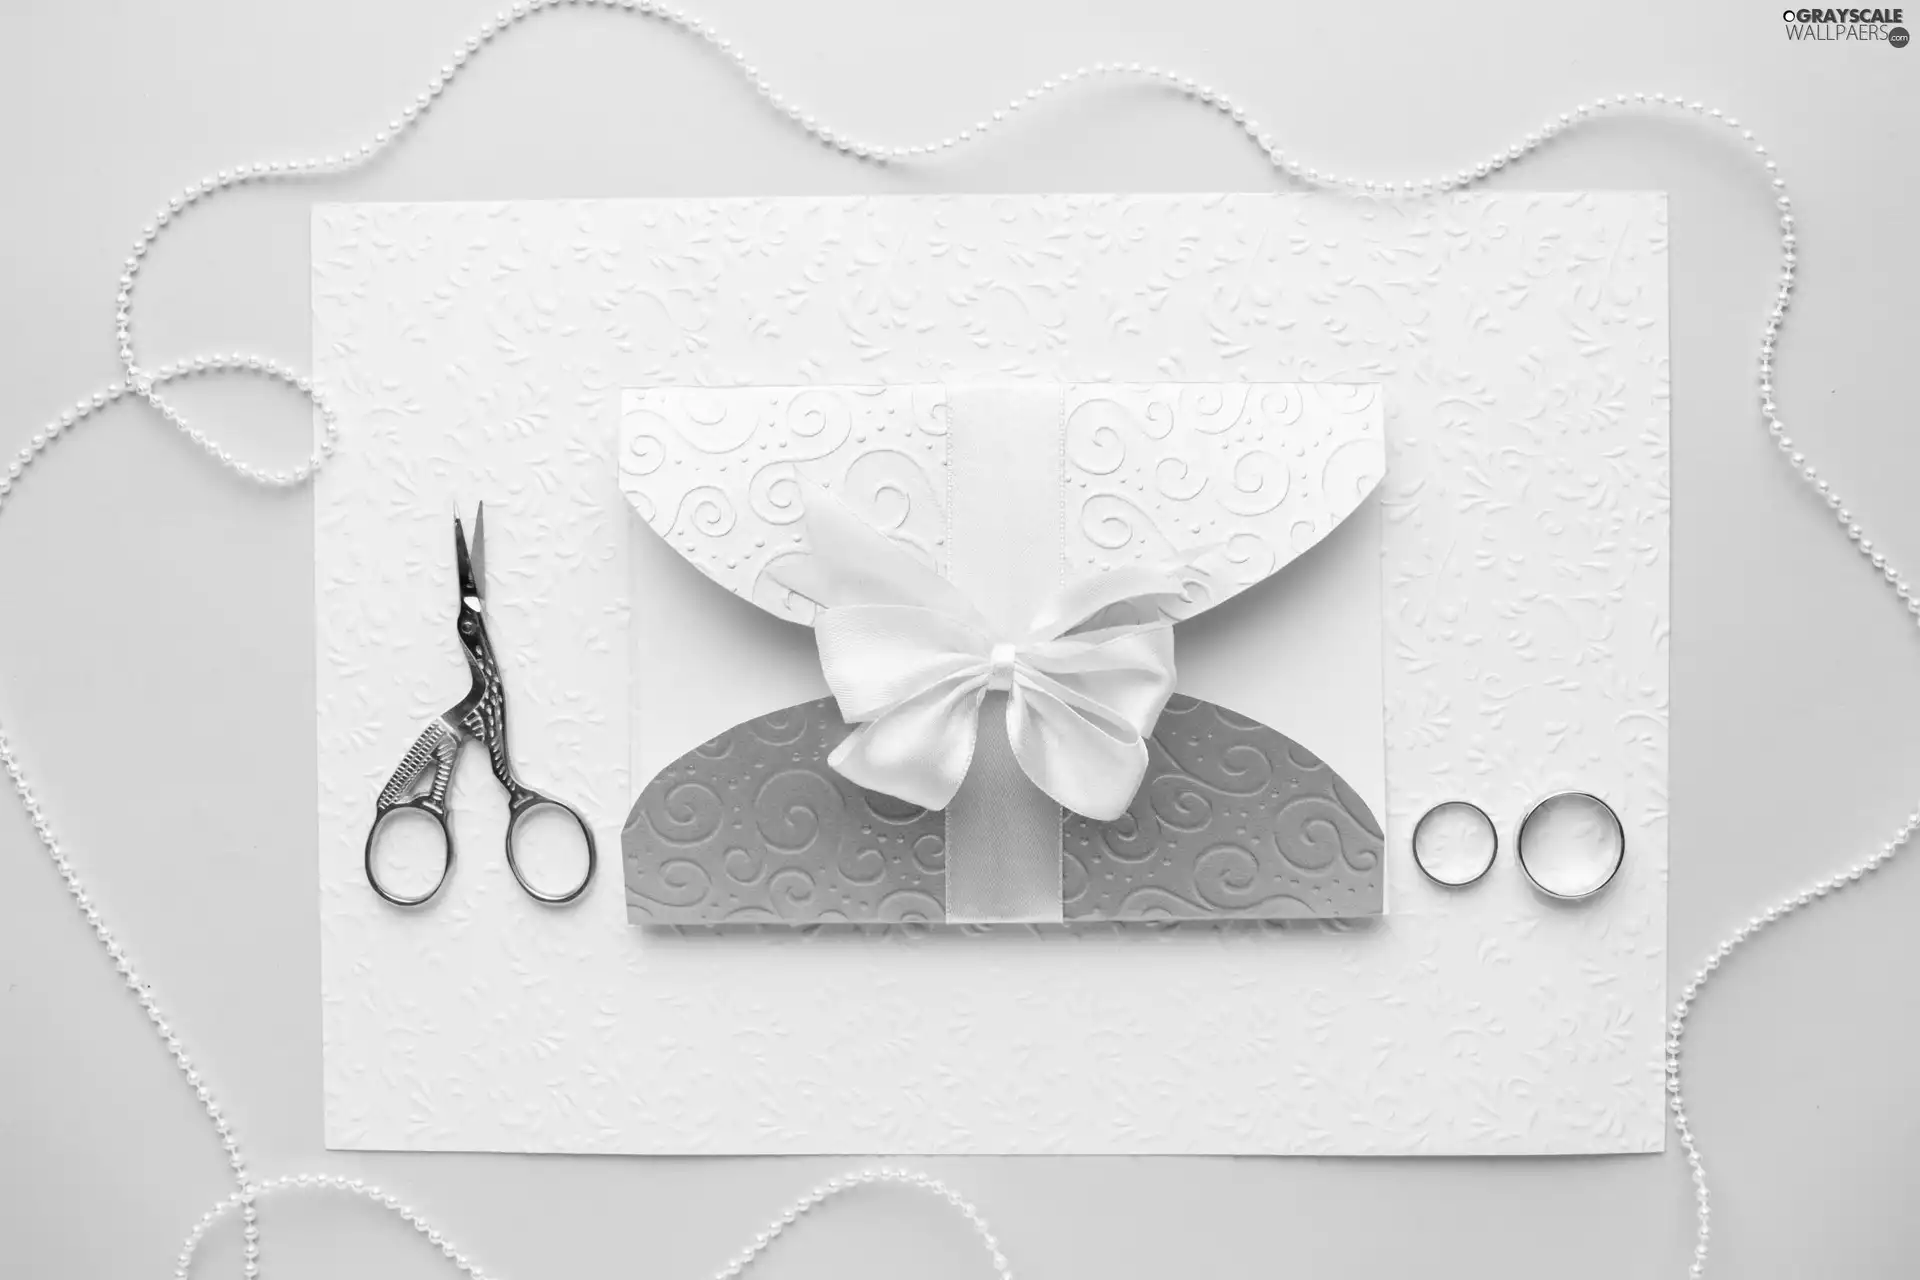 rings, marriage, beads, background, scissors, invitation